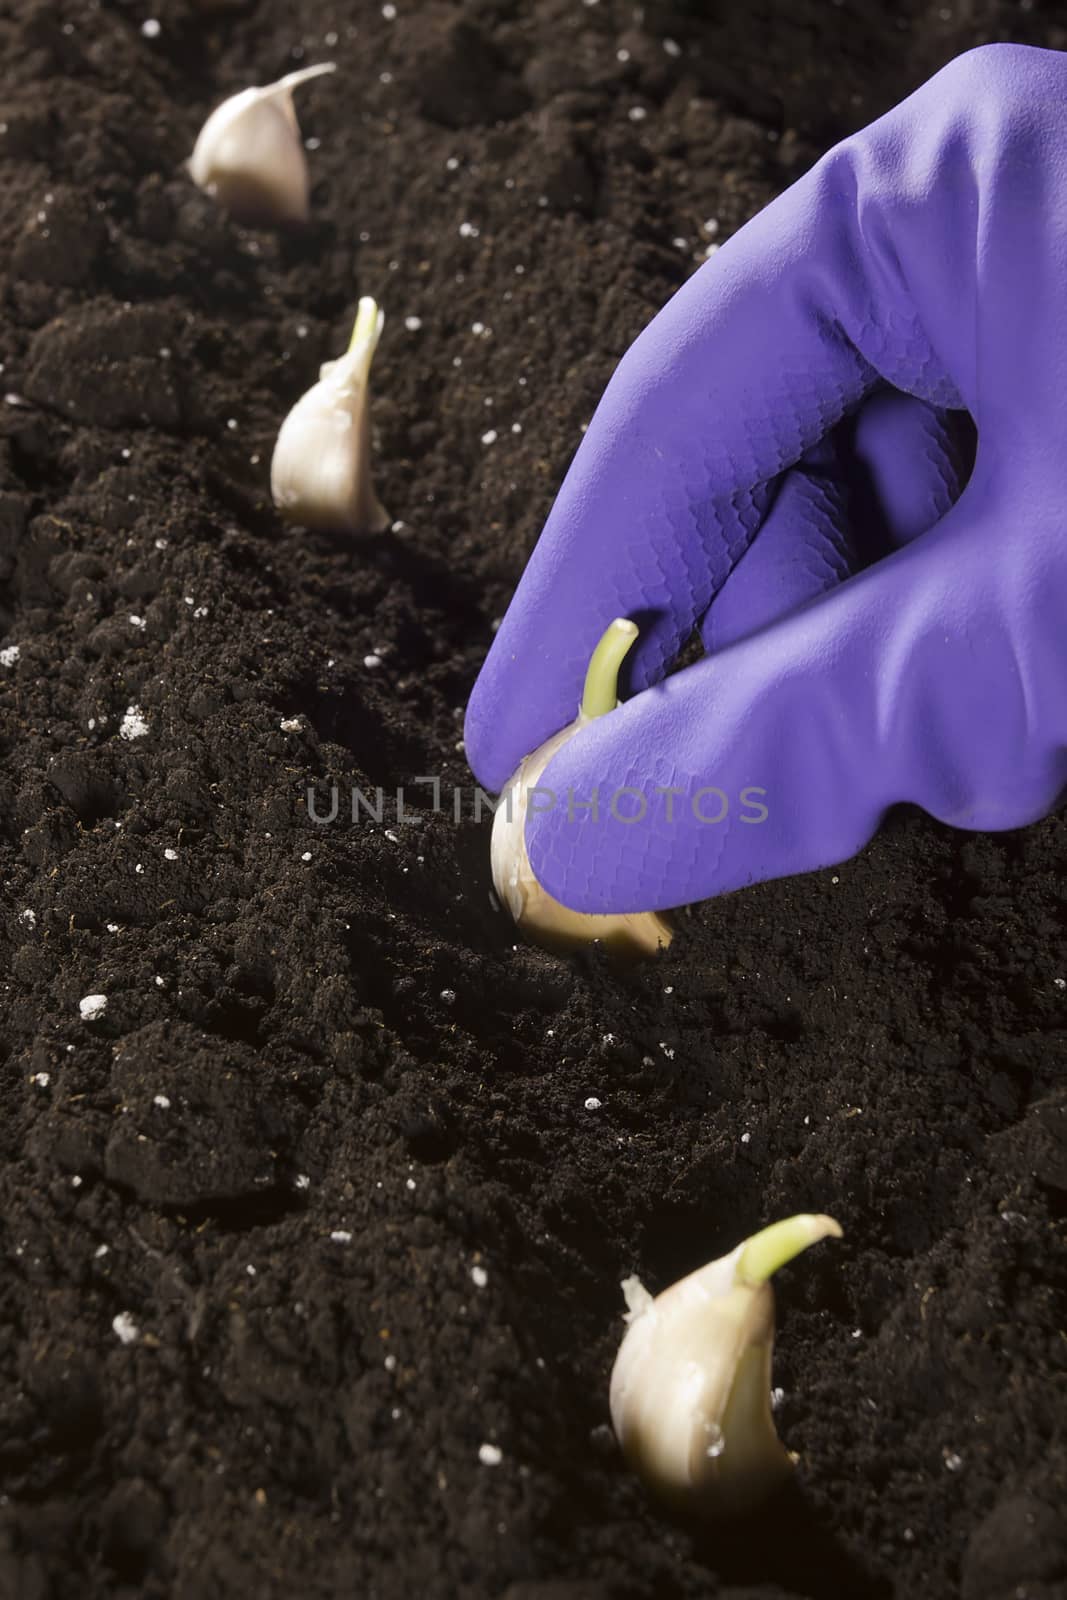 Garlic is planted in the ground by VIPDesignUSA